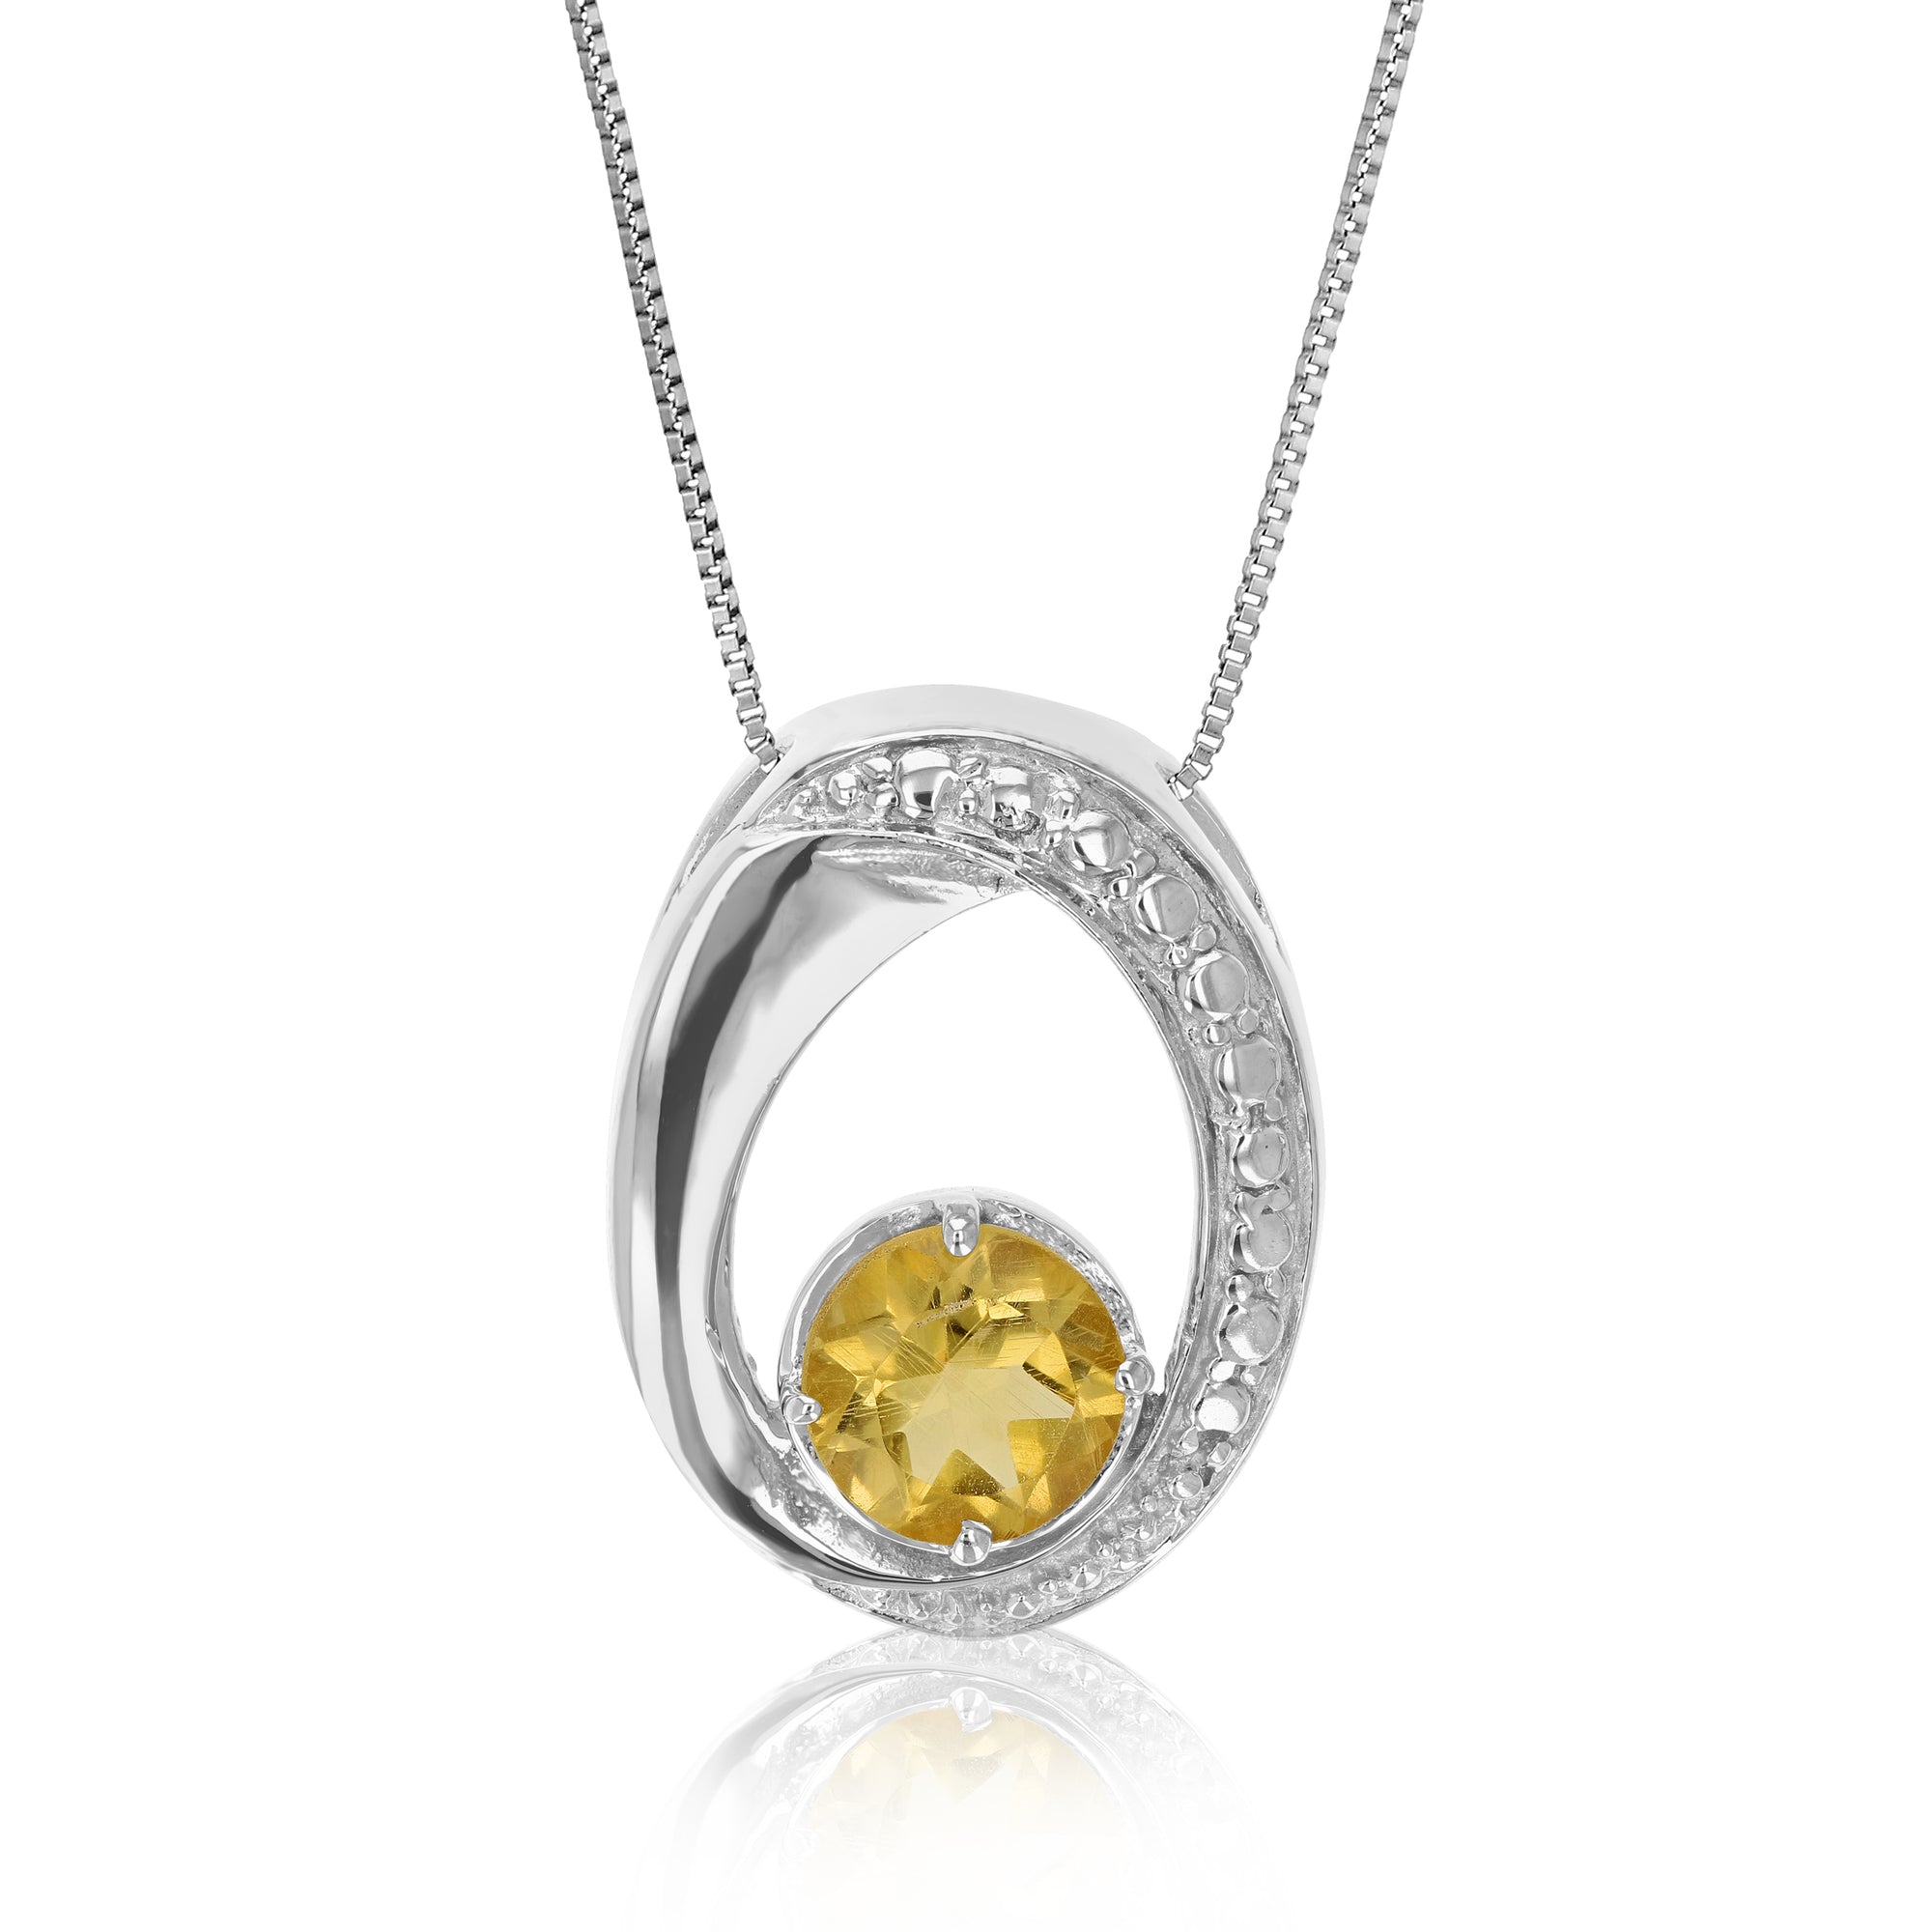 1.20 cttw Pendant Necklace, Citrine Pendant Necklace for Women in .925 Sterling Silver with Rhodium, 18 Inch Chain, Prong Setting